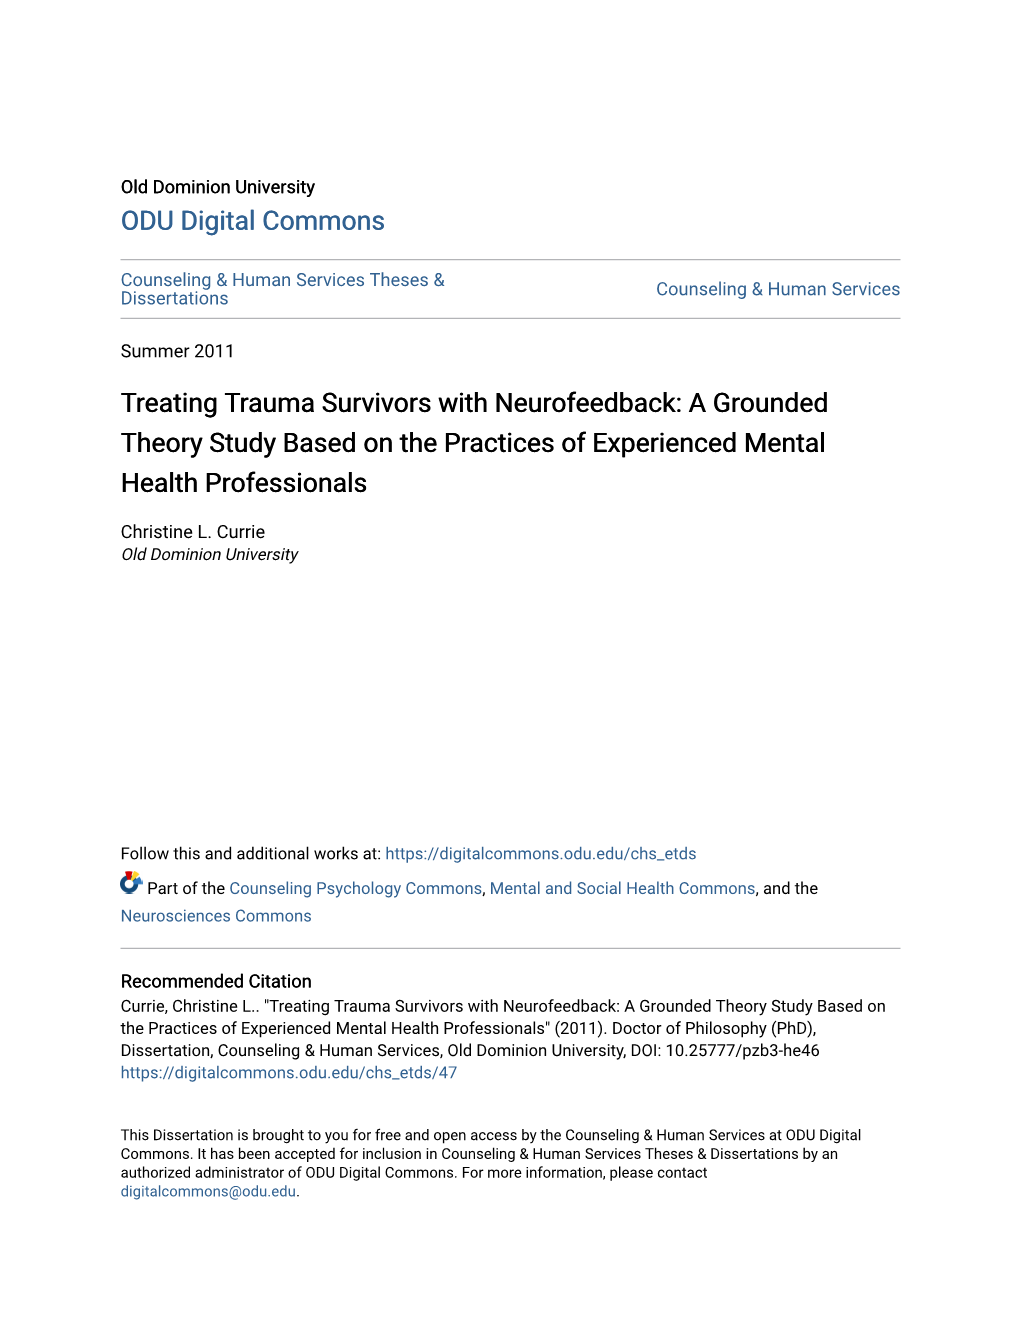 Treating Trauma Survivors with Neurofeedback: a Grounded Theory Study Based on the Practices of Experienced Mental Health Professionals